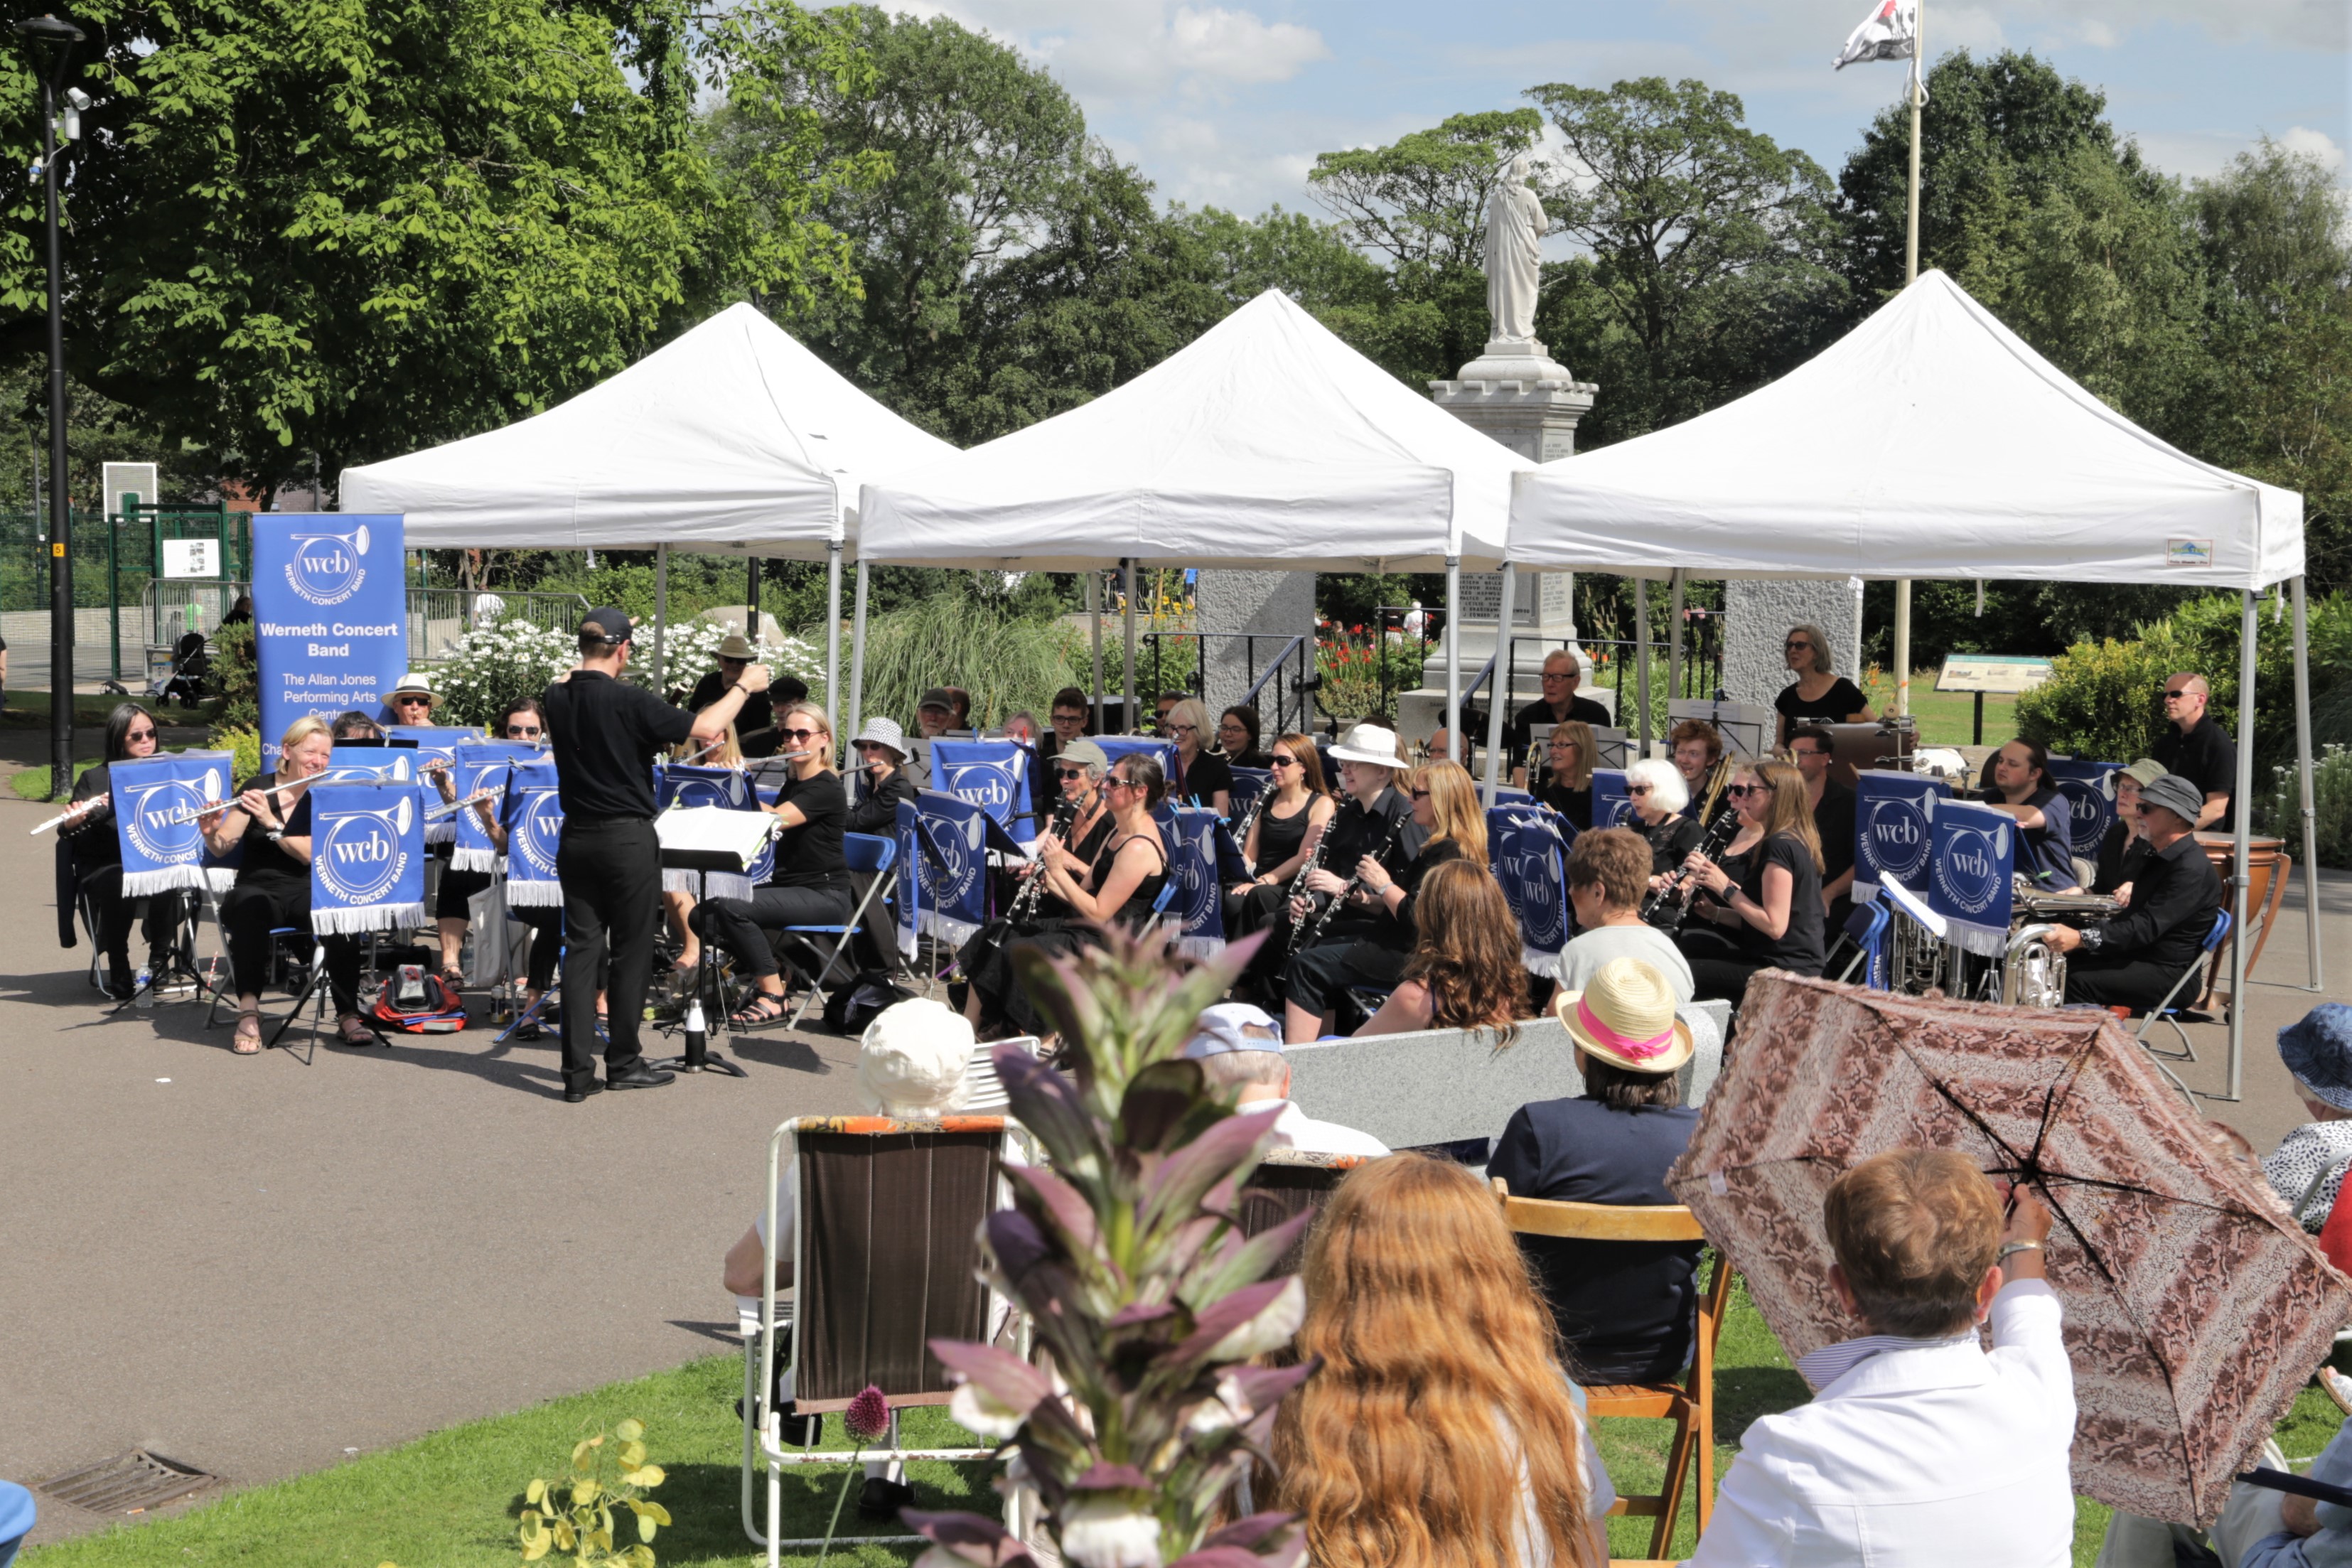 Werneth Concert Band performing in Marple Memorial Park